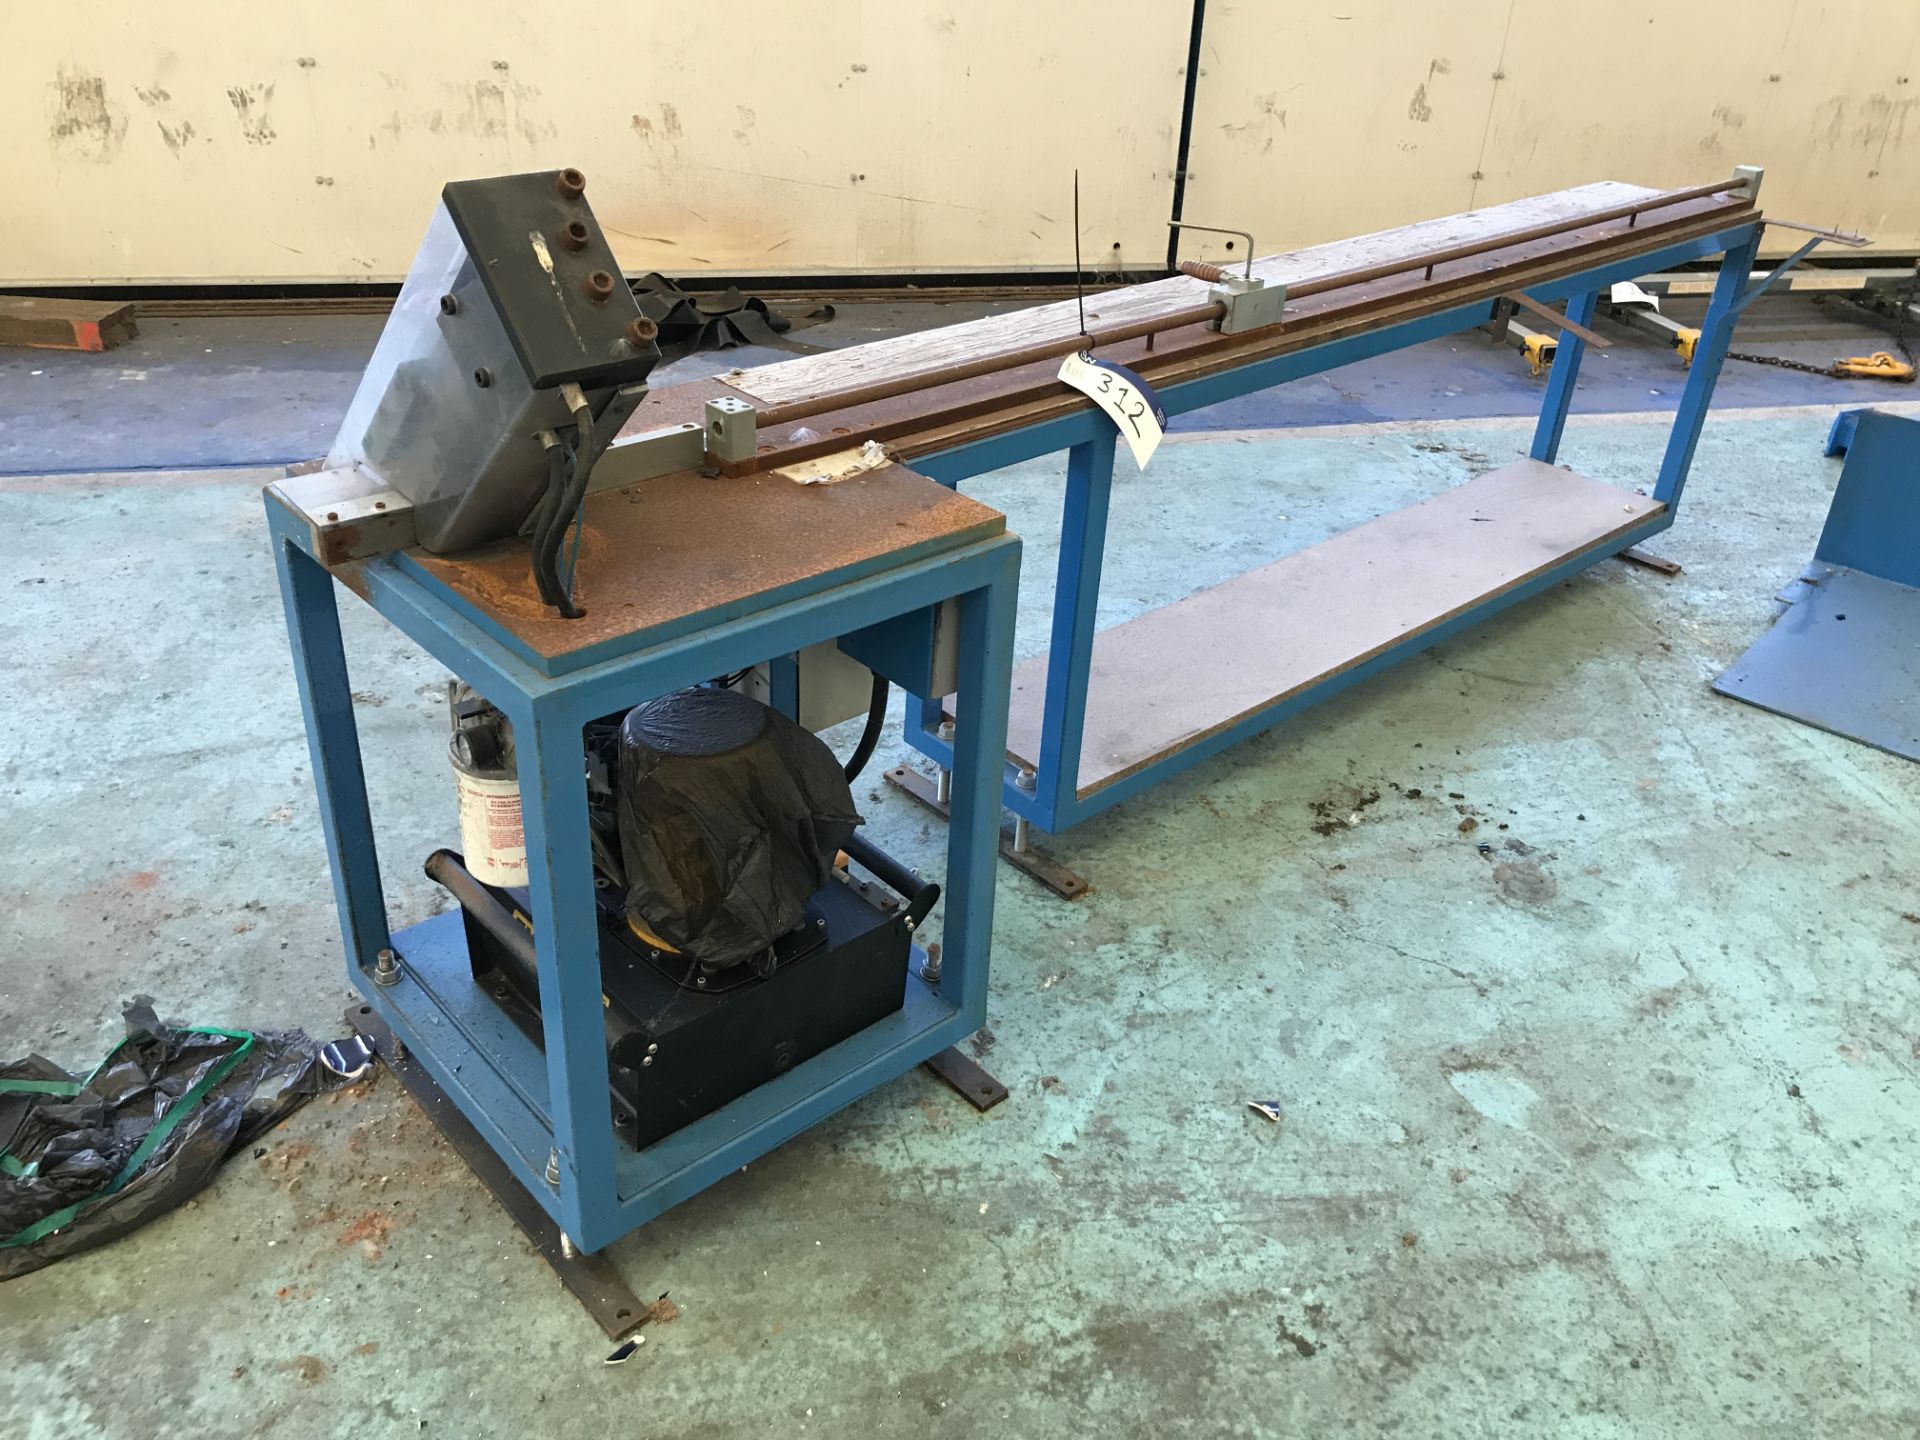 Steel Framed Workshop Bench, with cutting equipment